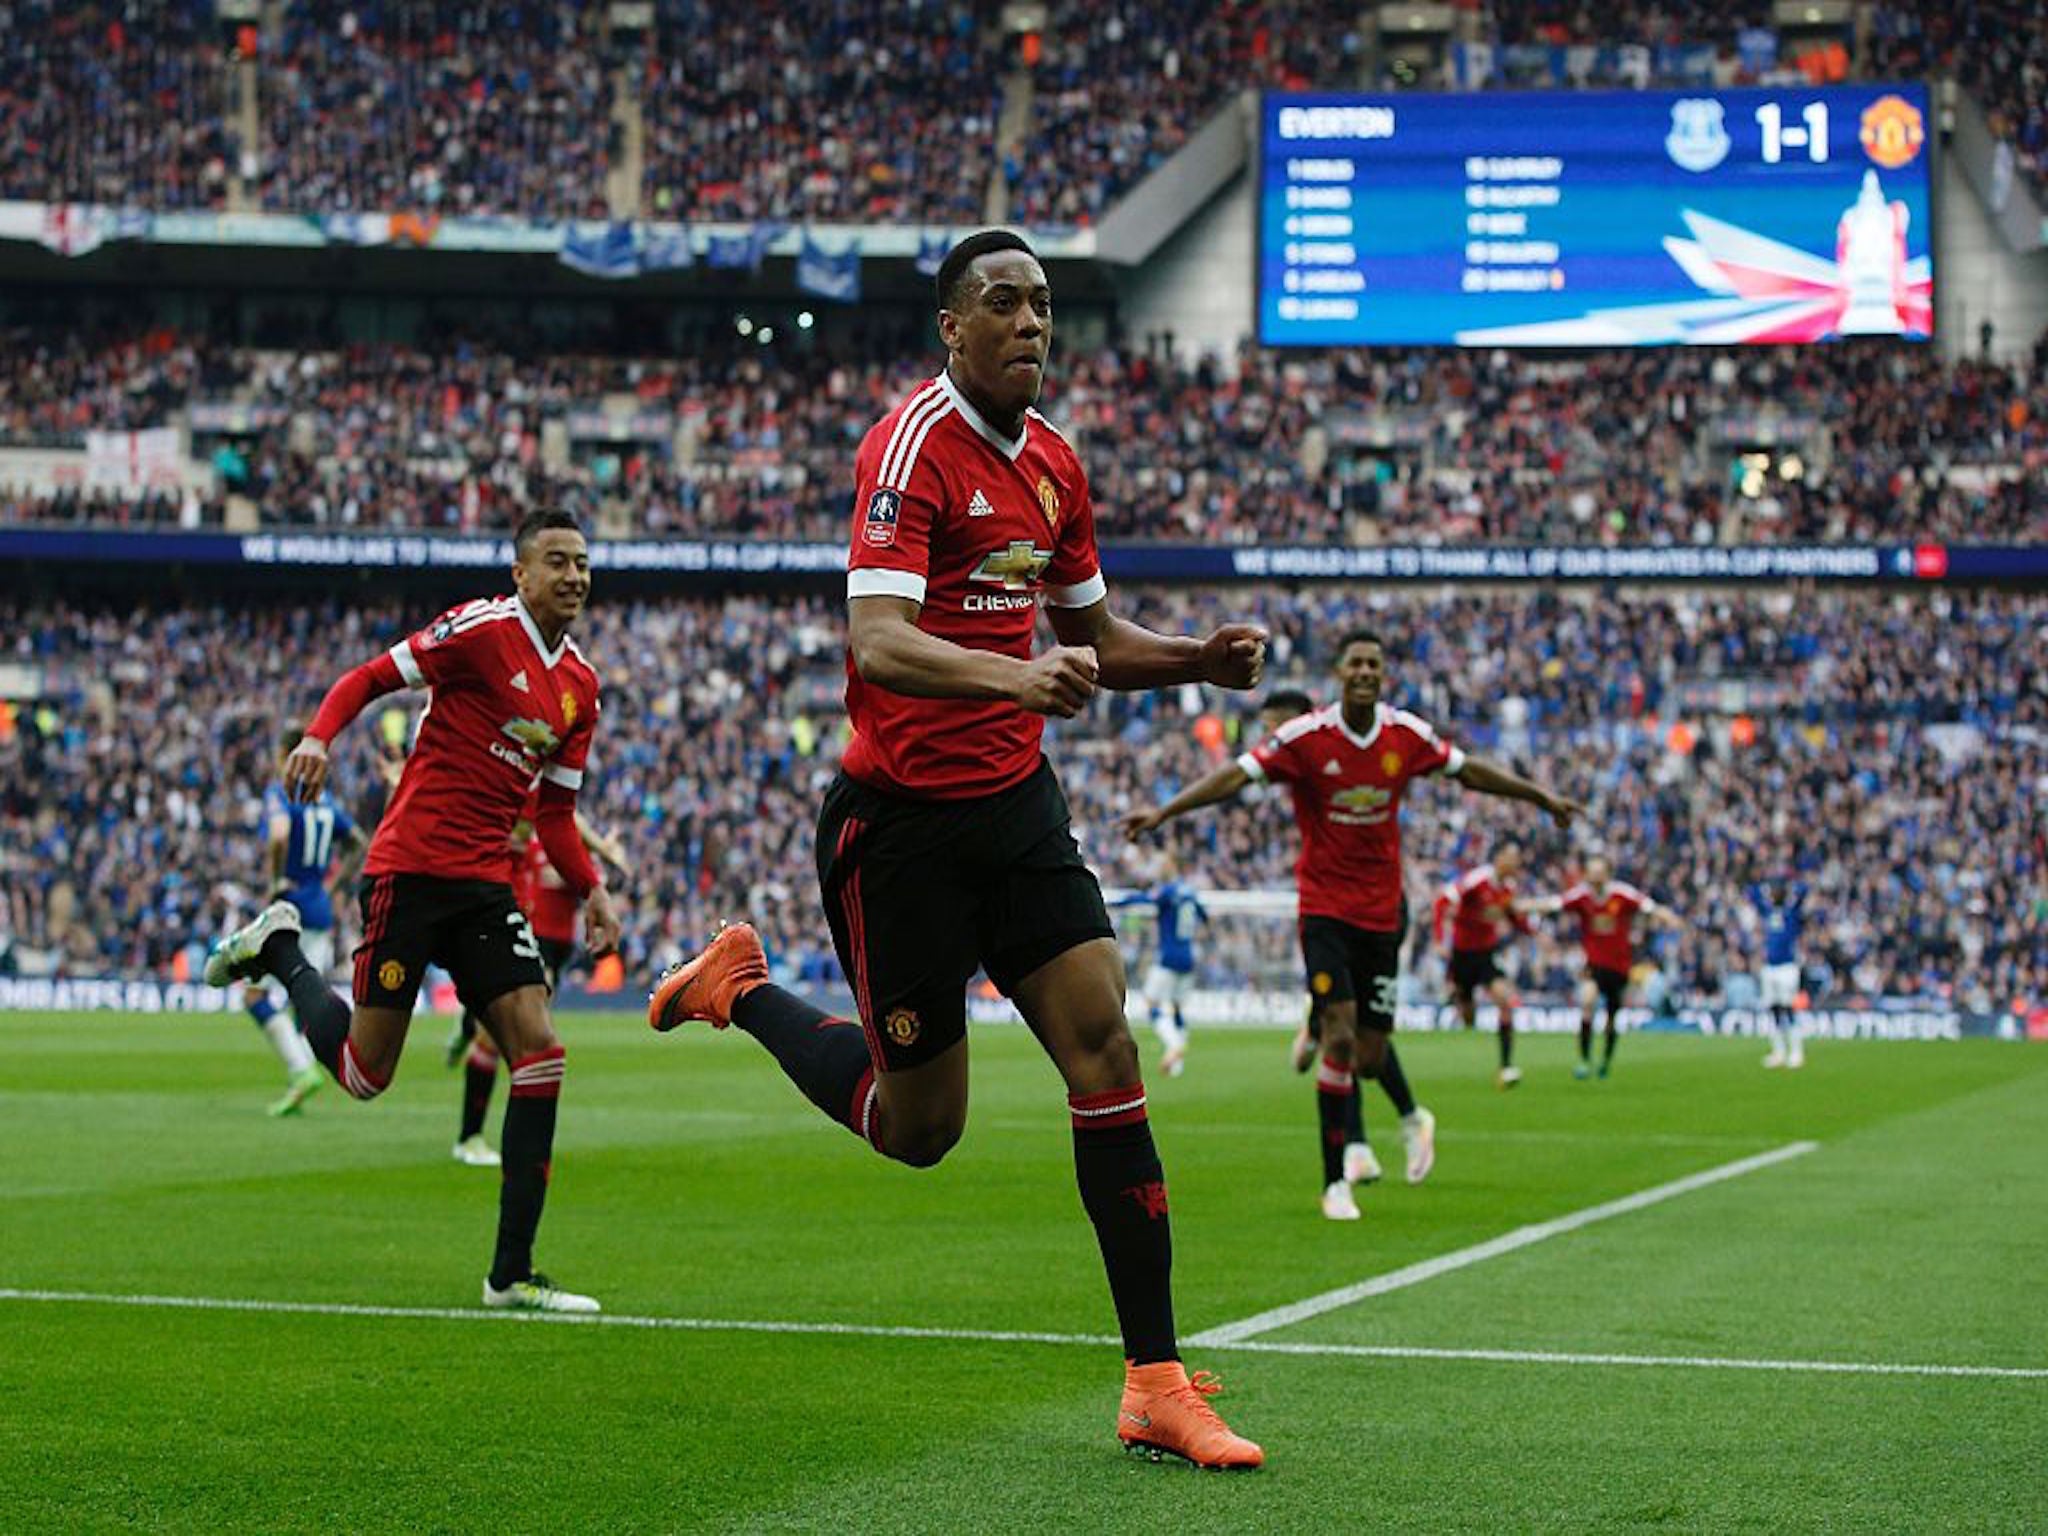 Everton vs Manchester United FA Cup semi-final live: Anthony Martial